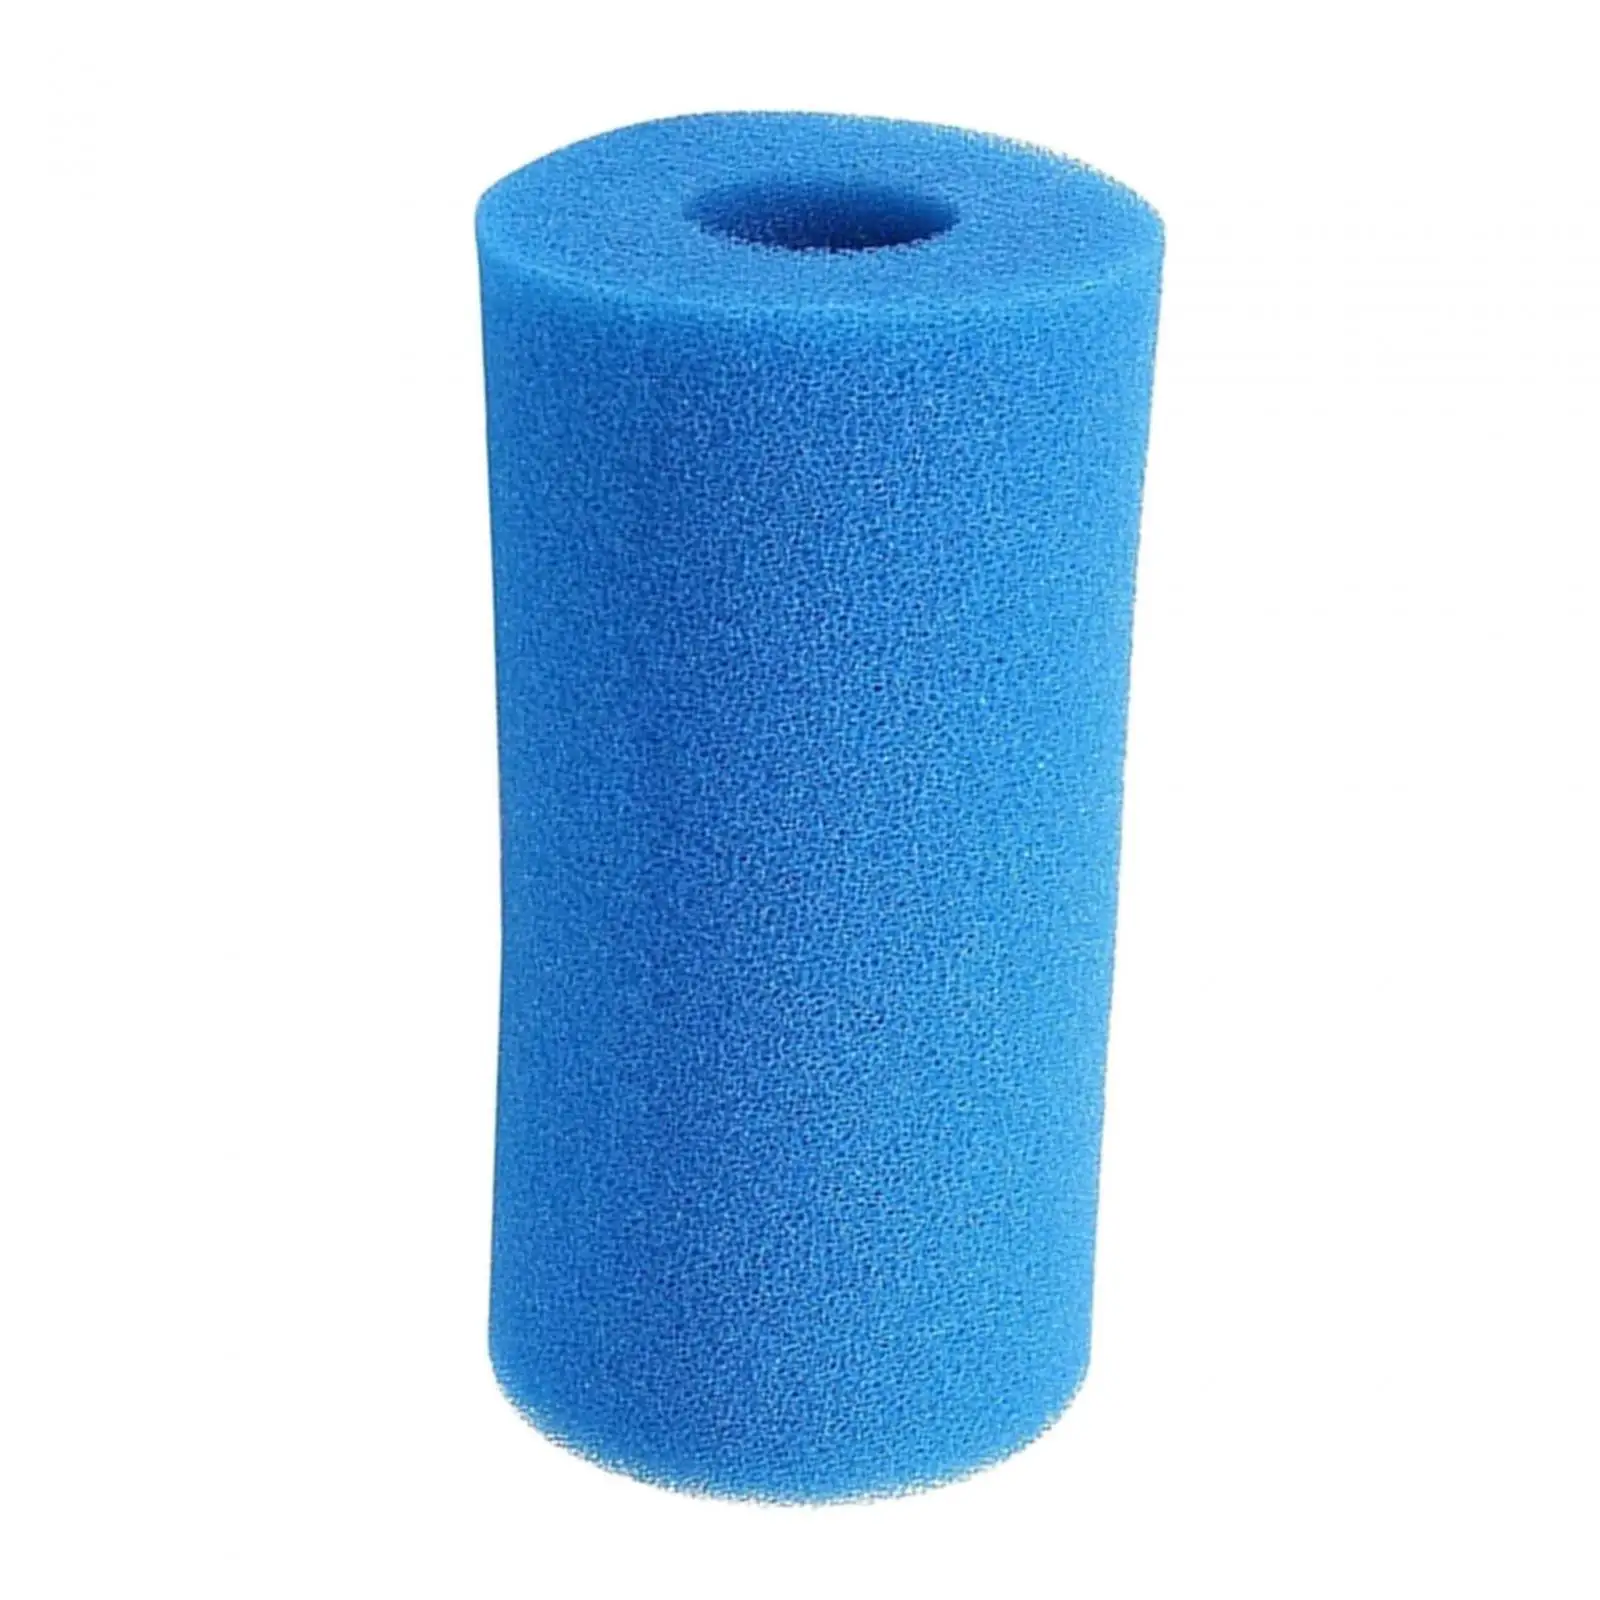 Pool Filter Cartridge Washable Durable Pool Filter Sponge Cleaner Replace Parts